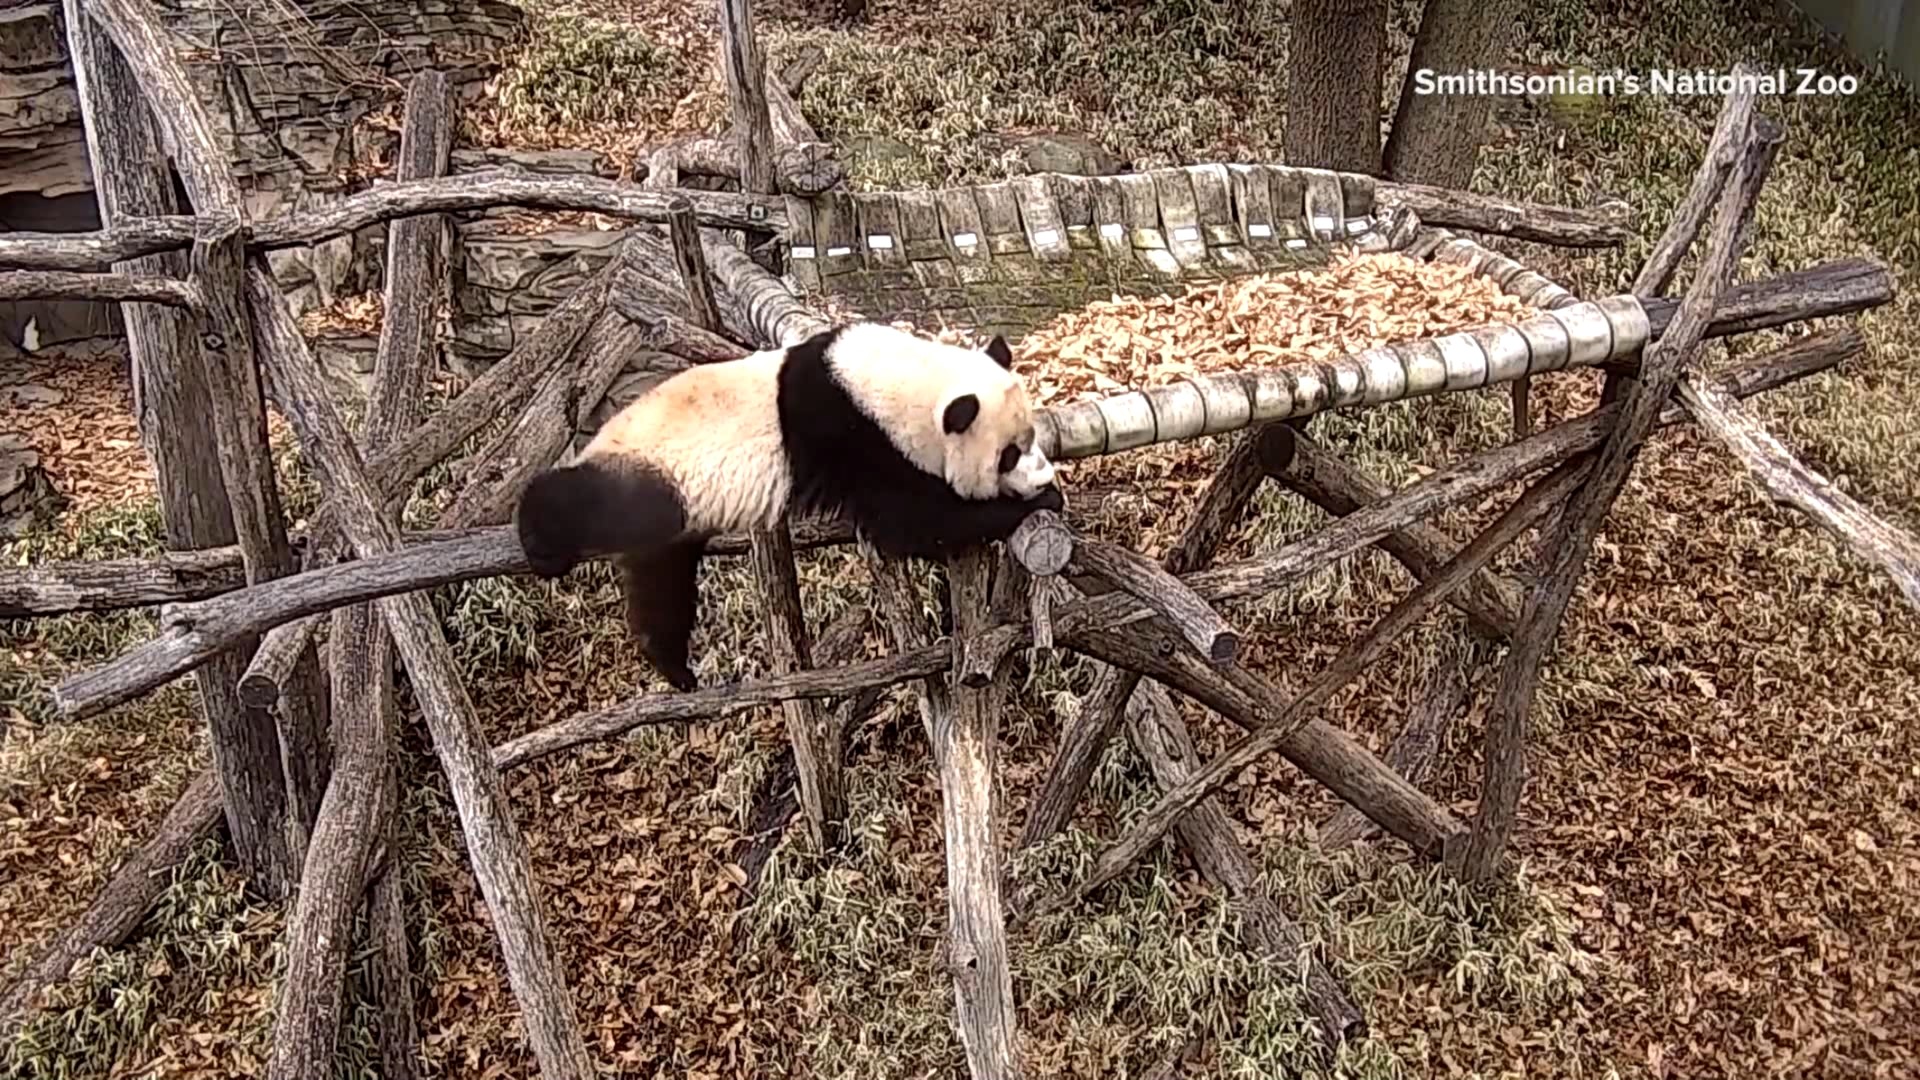 Xiao Qi Ji the panda showed off some of his gymnastics moves while playing at the Smithsonian's National Zoo in Washington, D.C. on January 19.